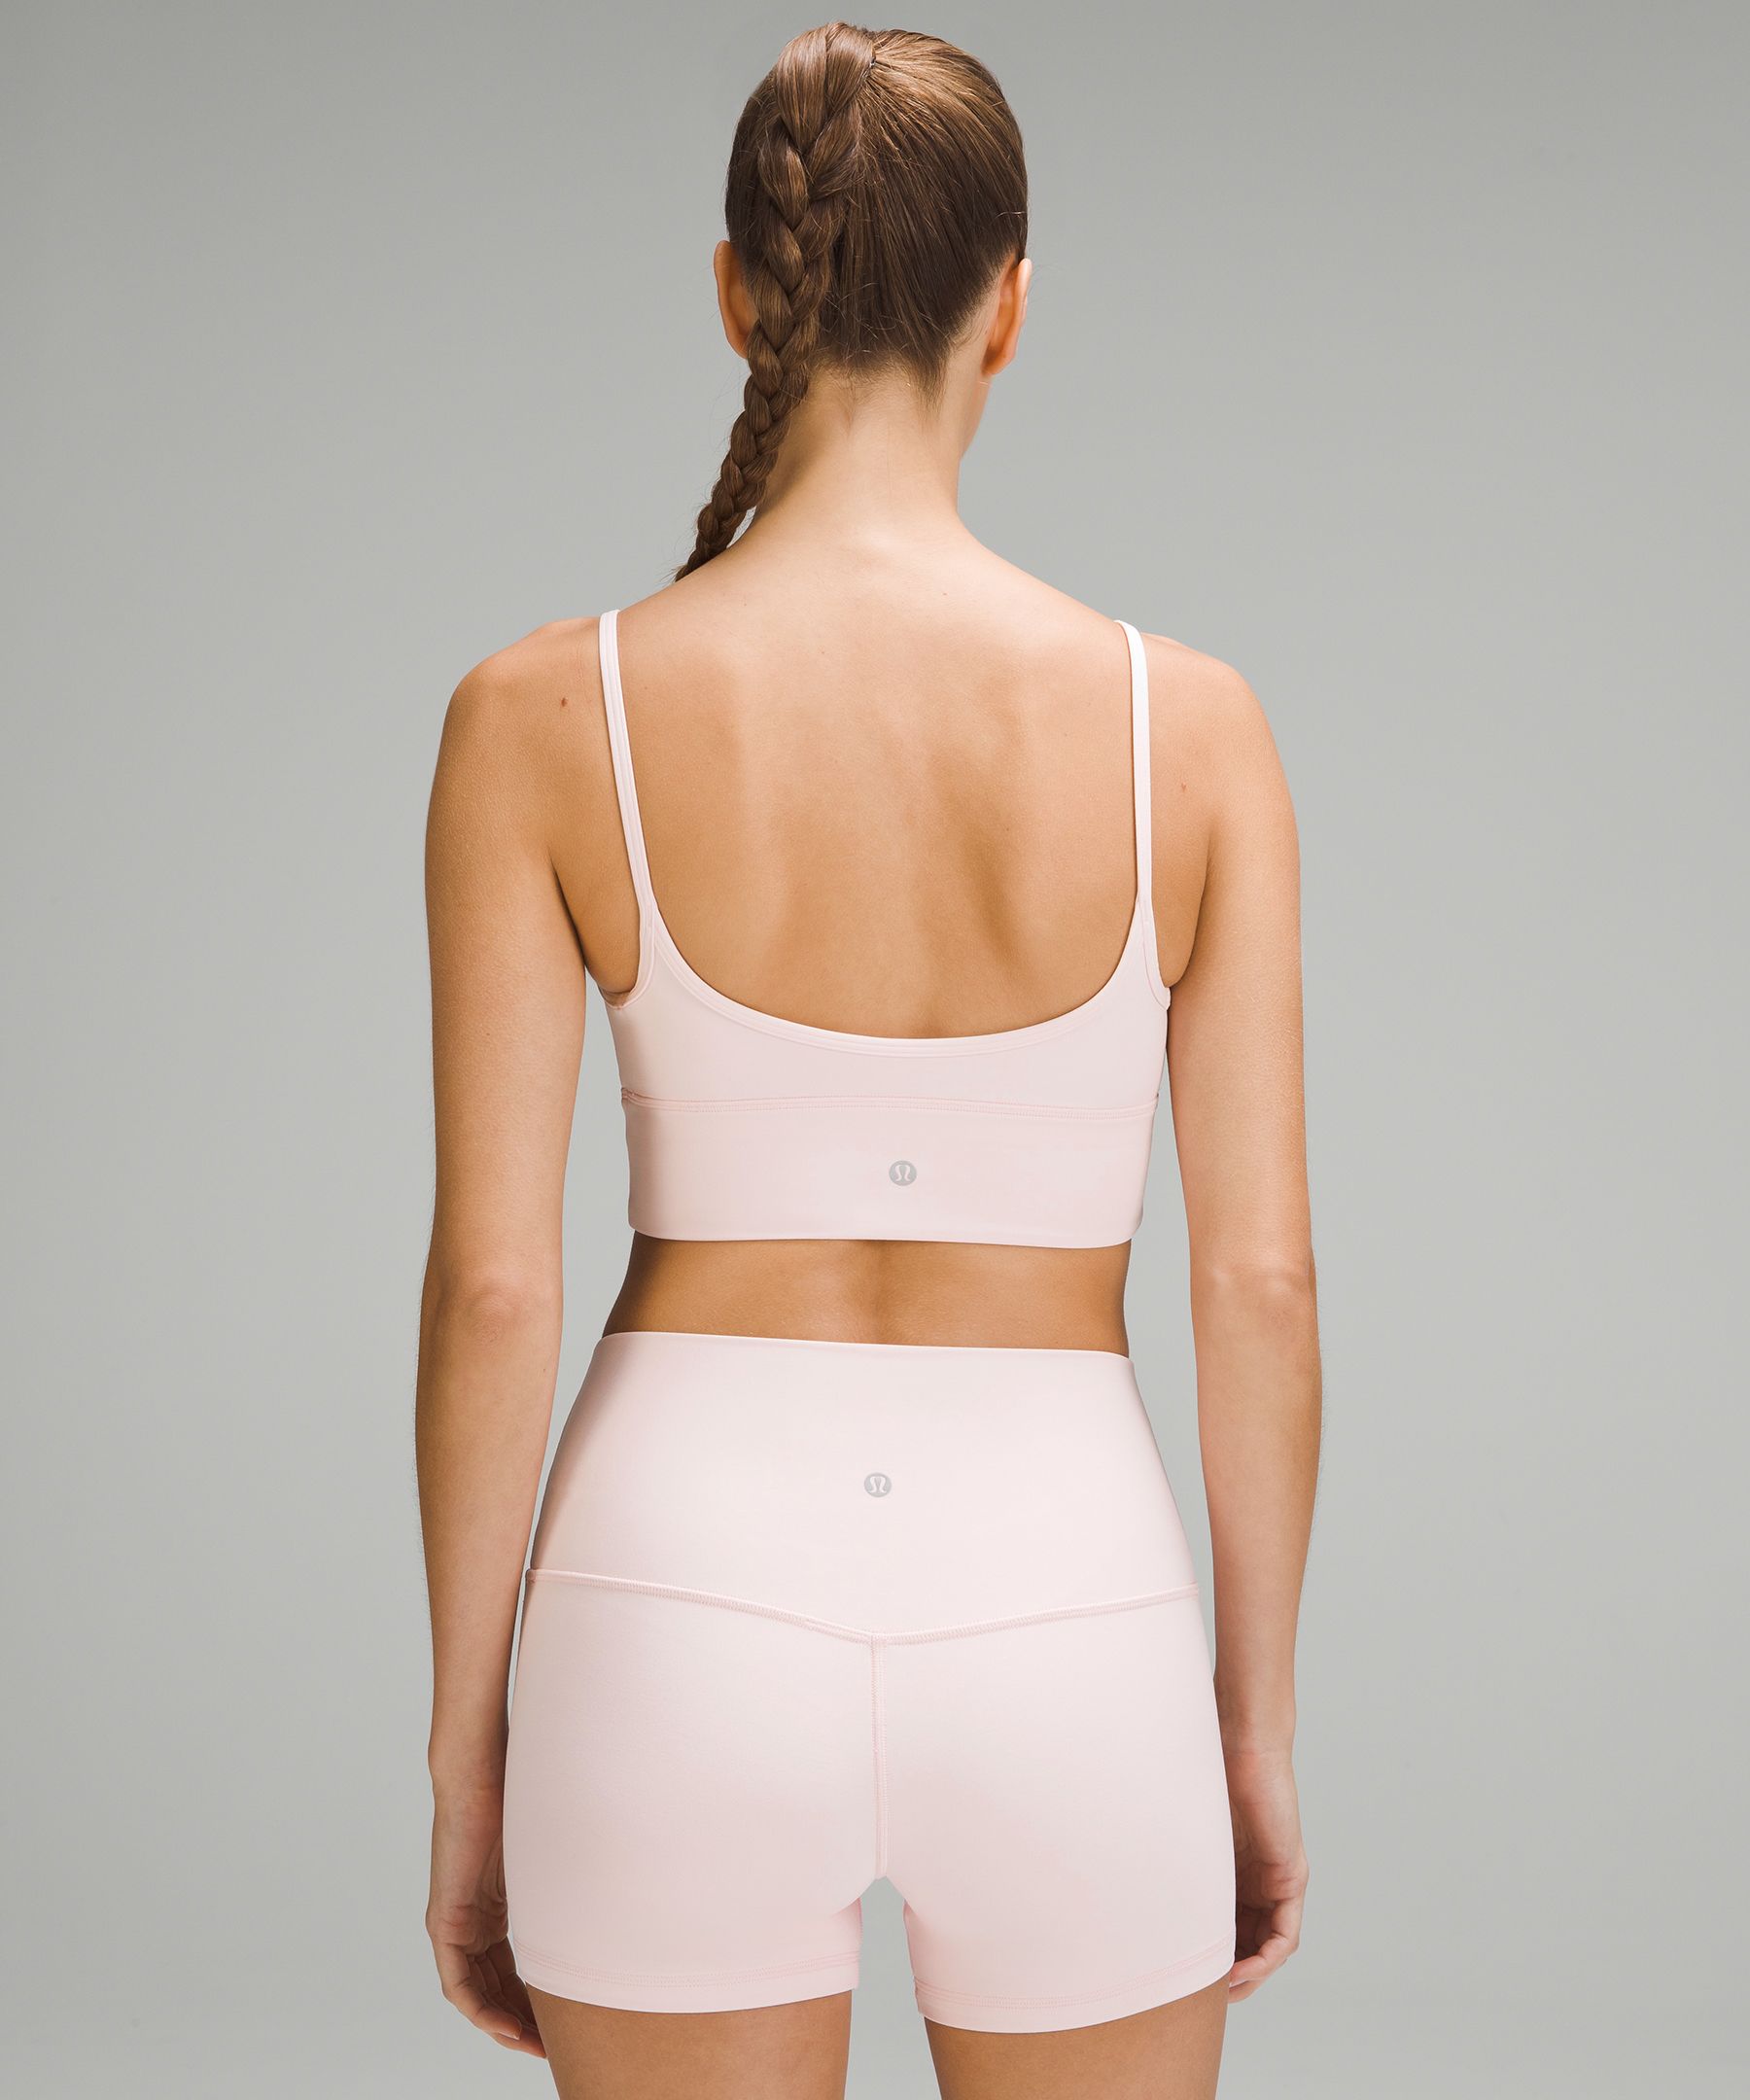 Best Lululemon Free To Be Bra - Size 2 for sale in Yorkville, Ontario for  2024